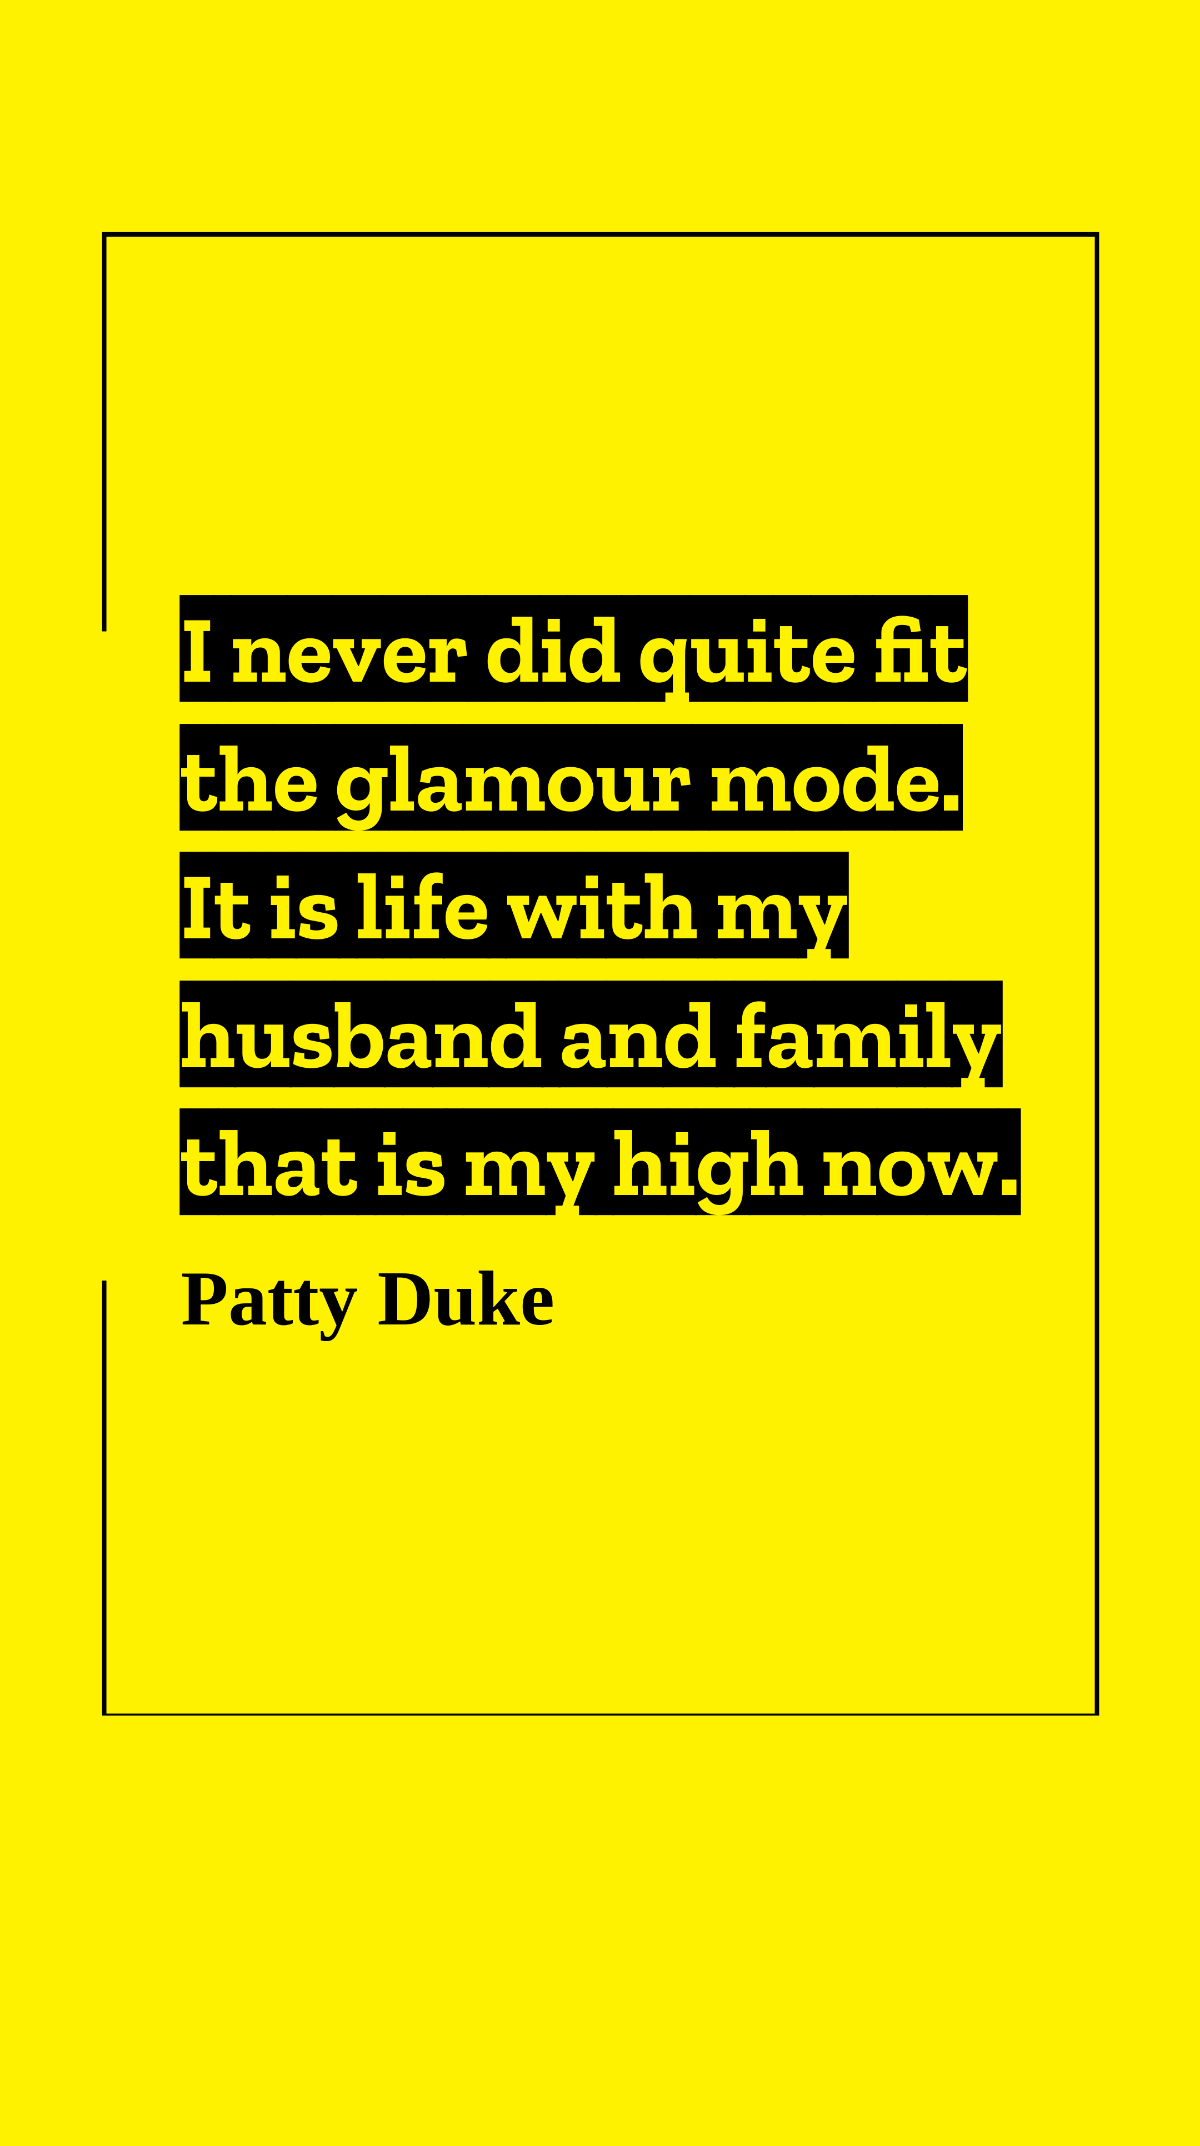 Free Patty Duke - I never did quite fit the glamour mode. It is life with my husband and family that is my high now. Template